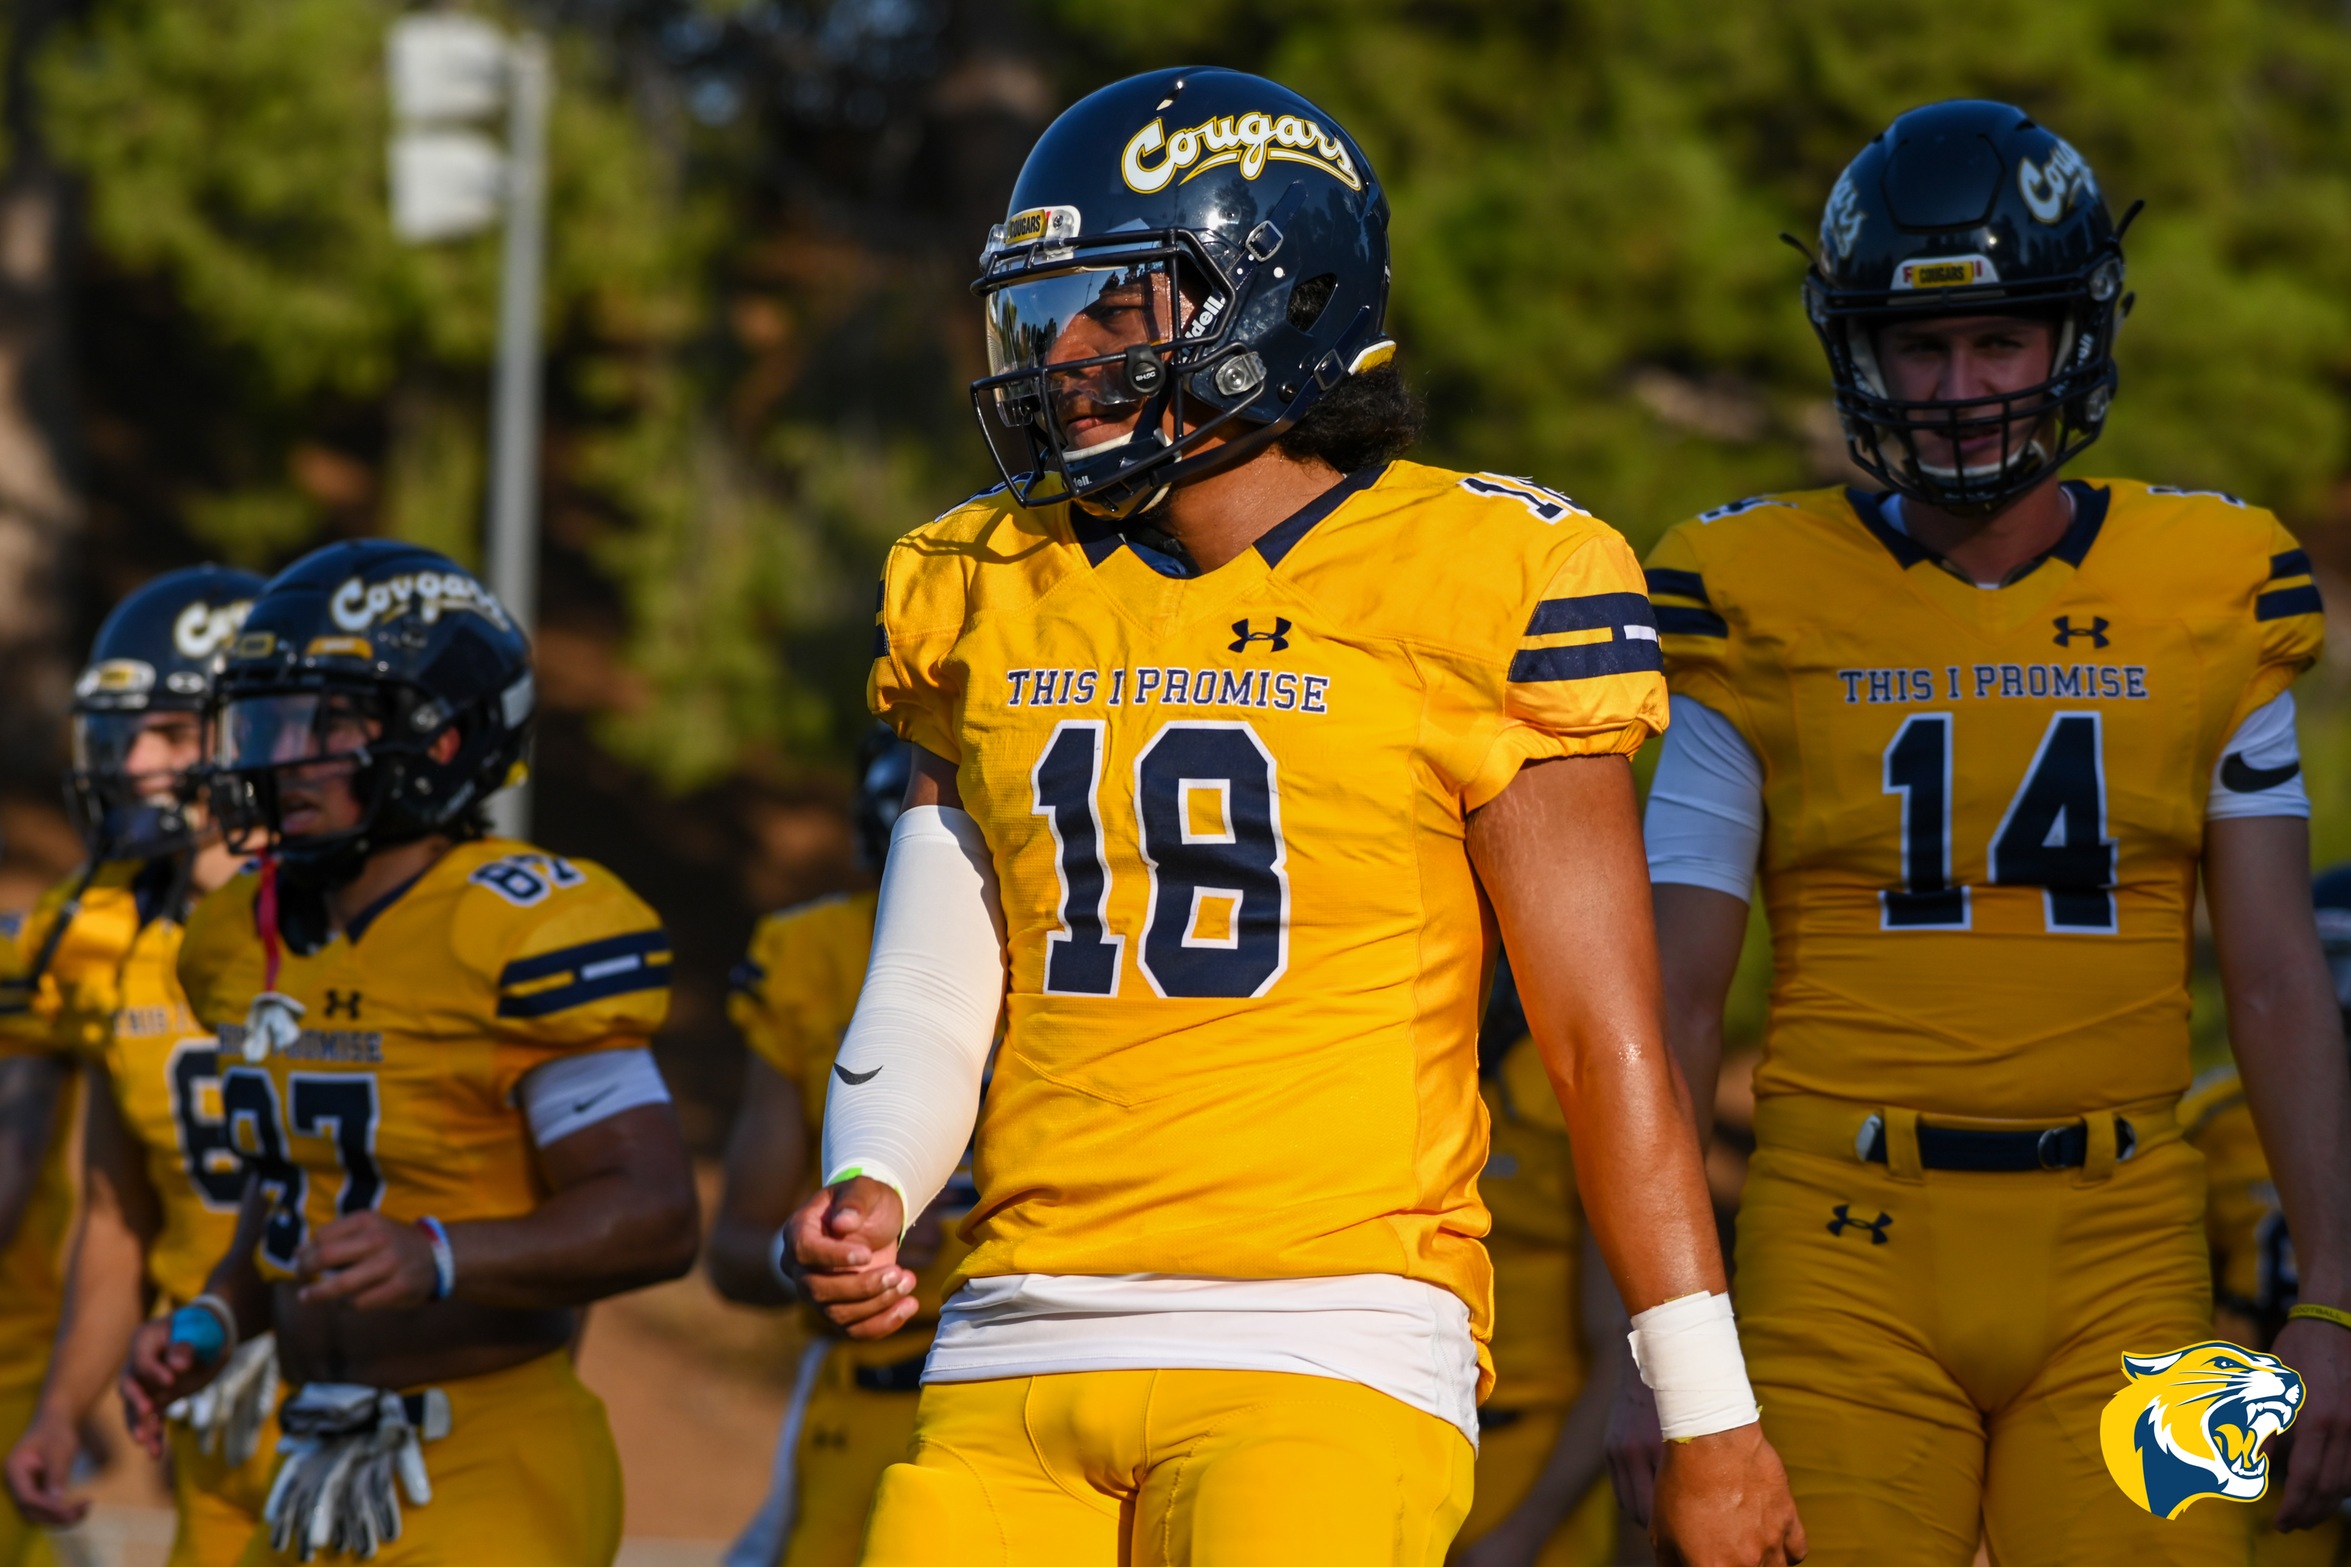 College of the Canyons quarterback Tooni Ikahihifo was named the Southern California Football Association (SCFA) National Division Co-Offensive Player of the Week after passing for 355 yards and five touchdowns, and rushing for another score, to lead the Cougars to a 42-30 win over Palomar College. —Dylan Stewart / 1550 Sports